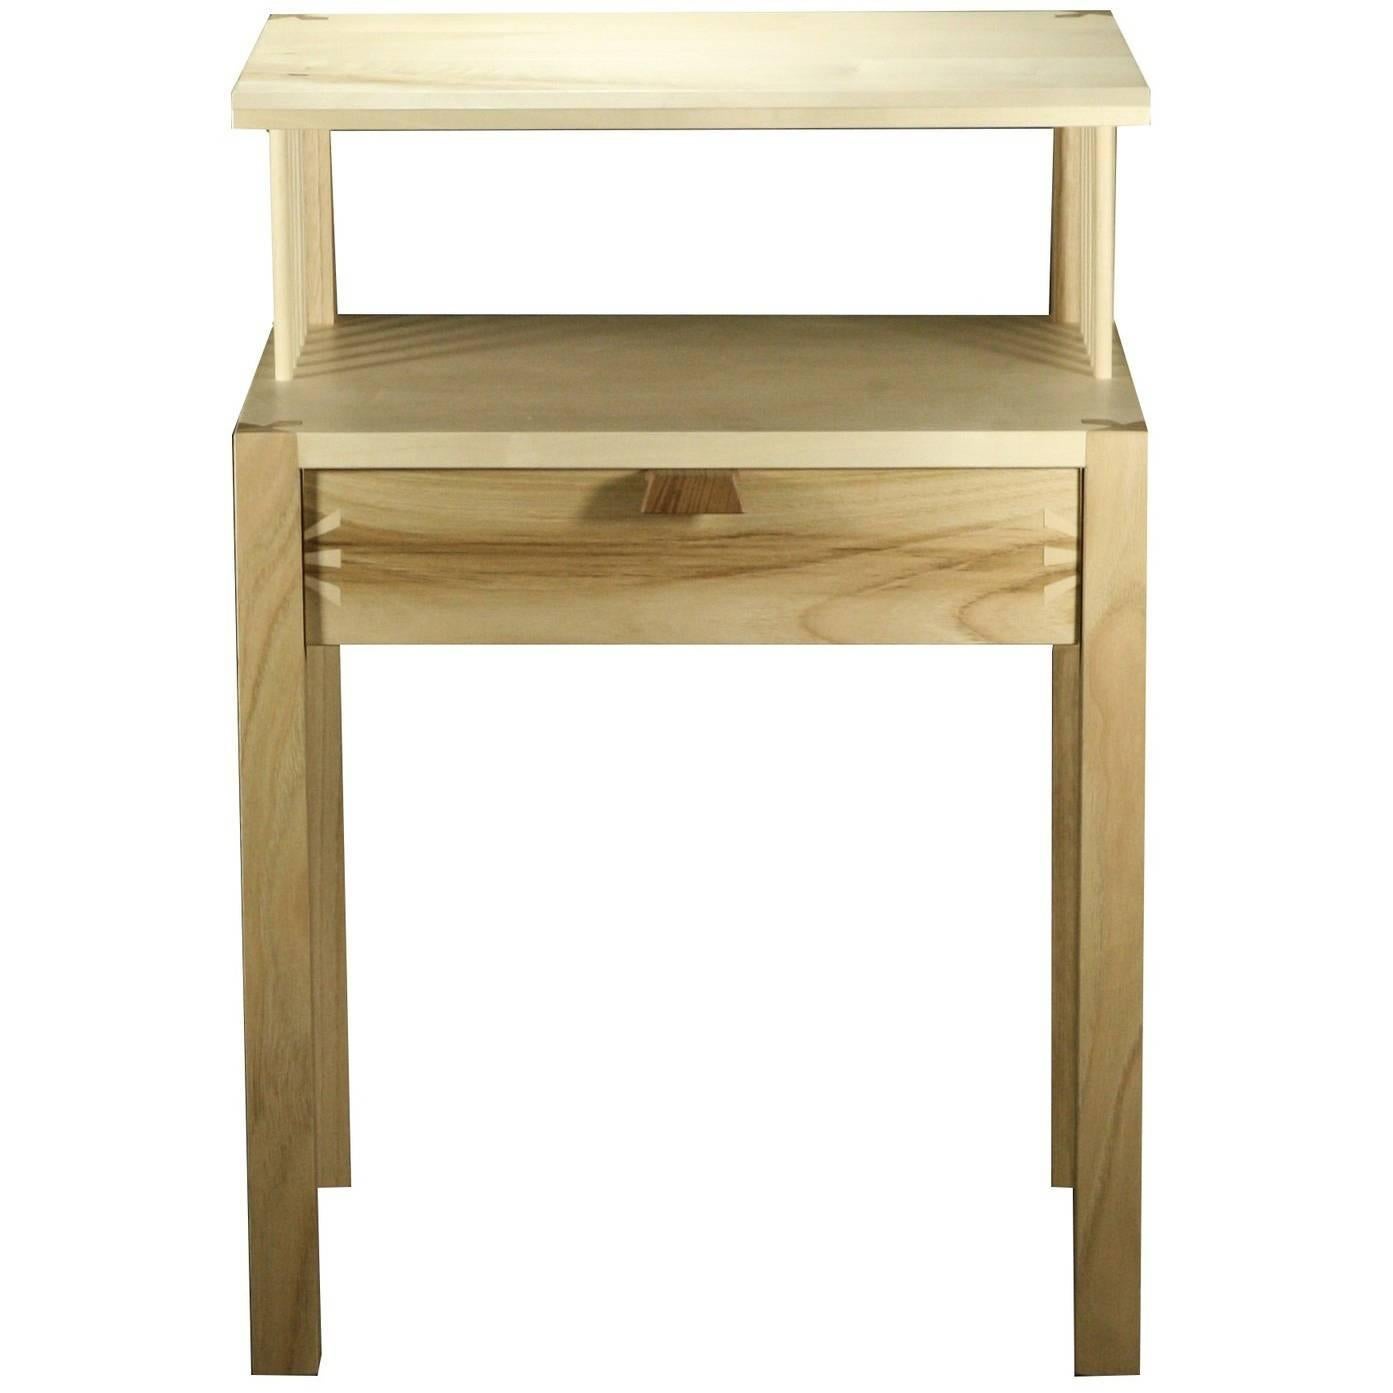 Bedtime for Joinery Nightstand